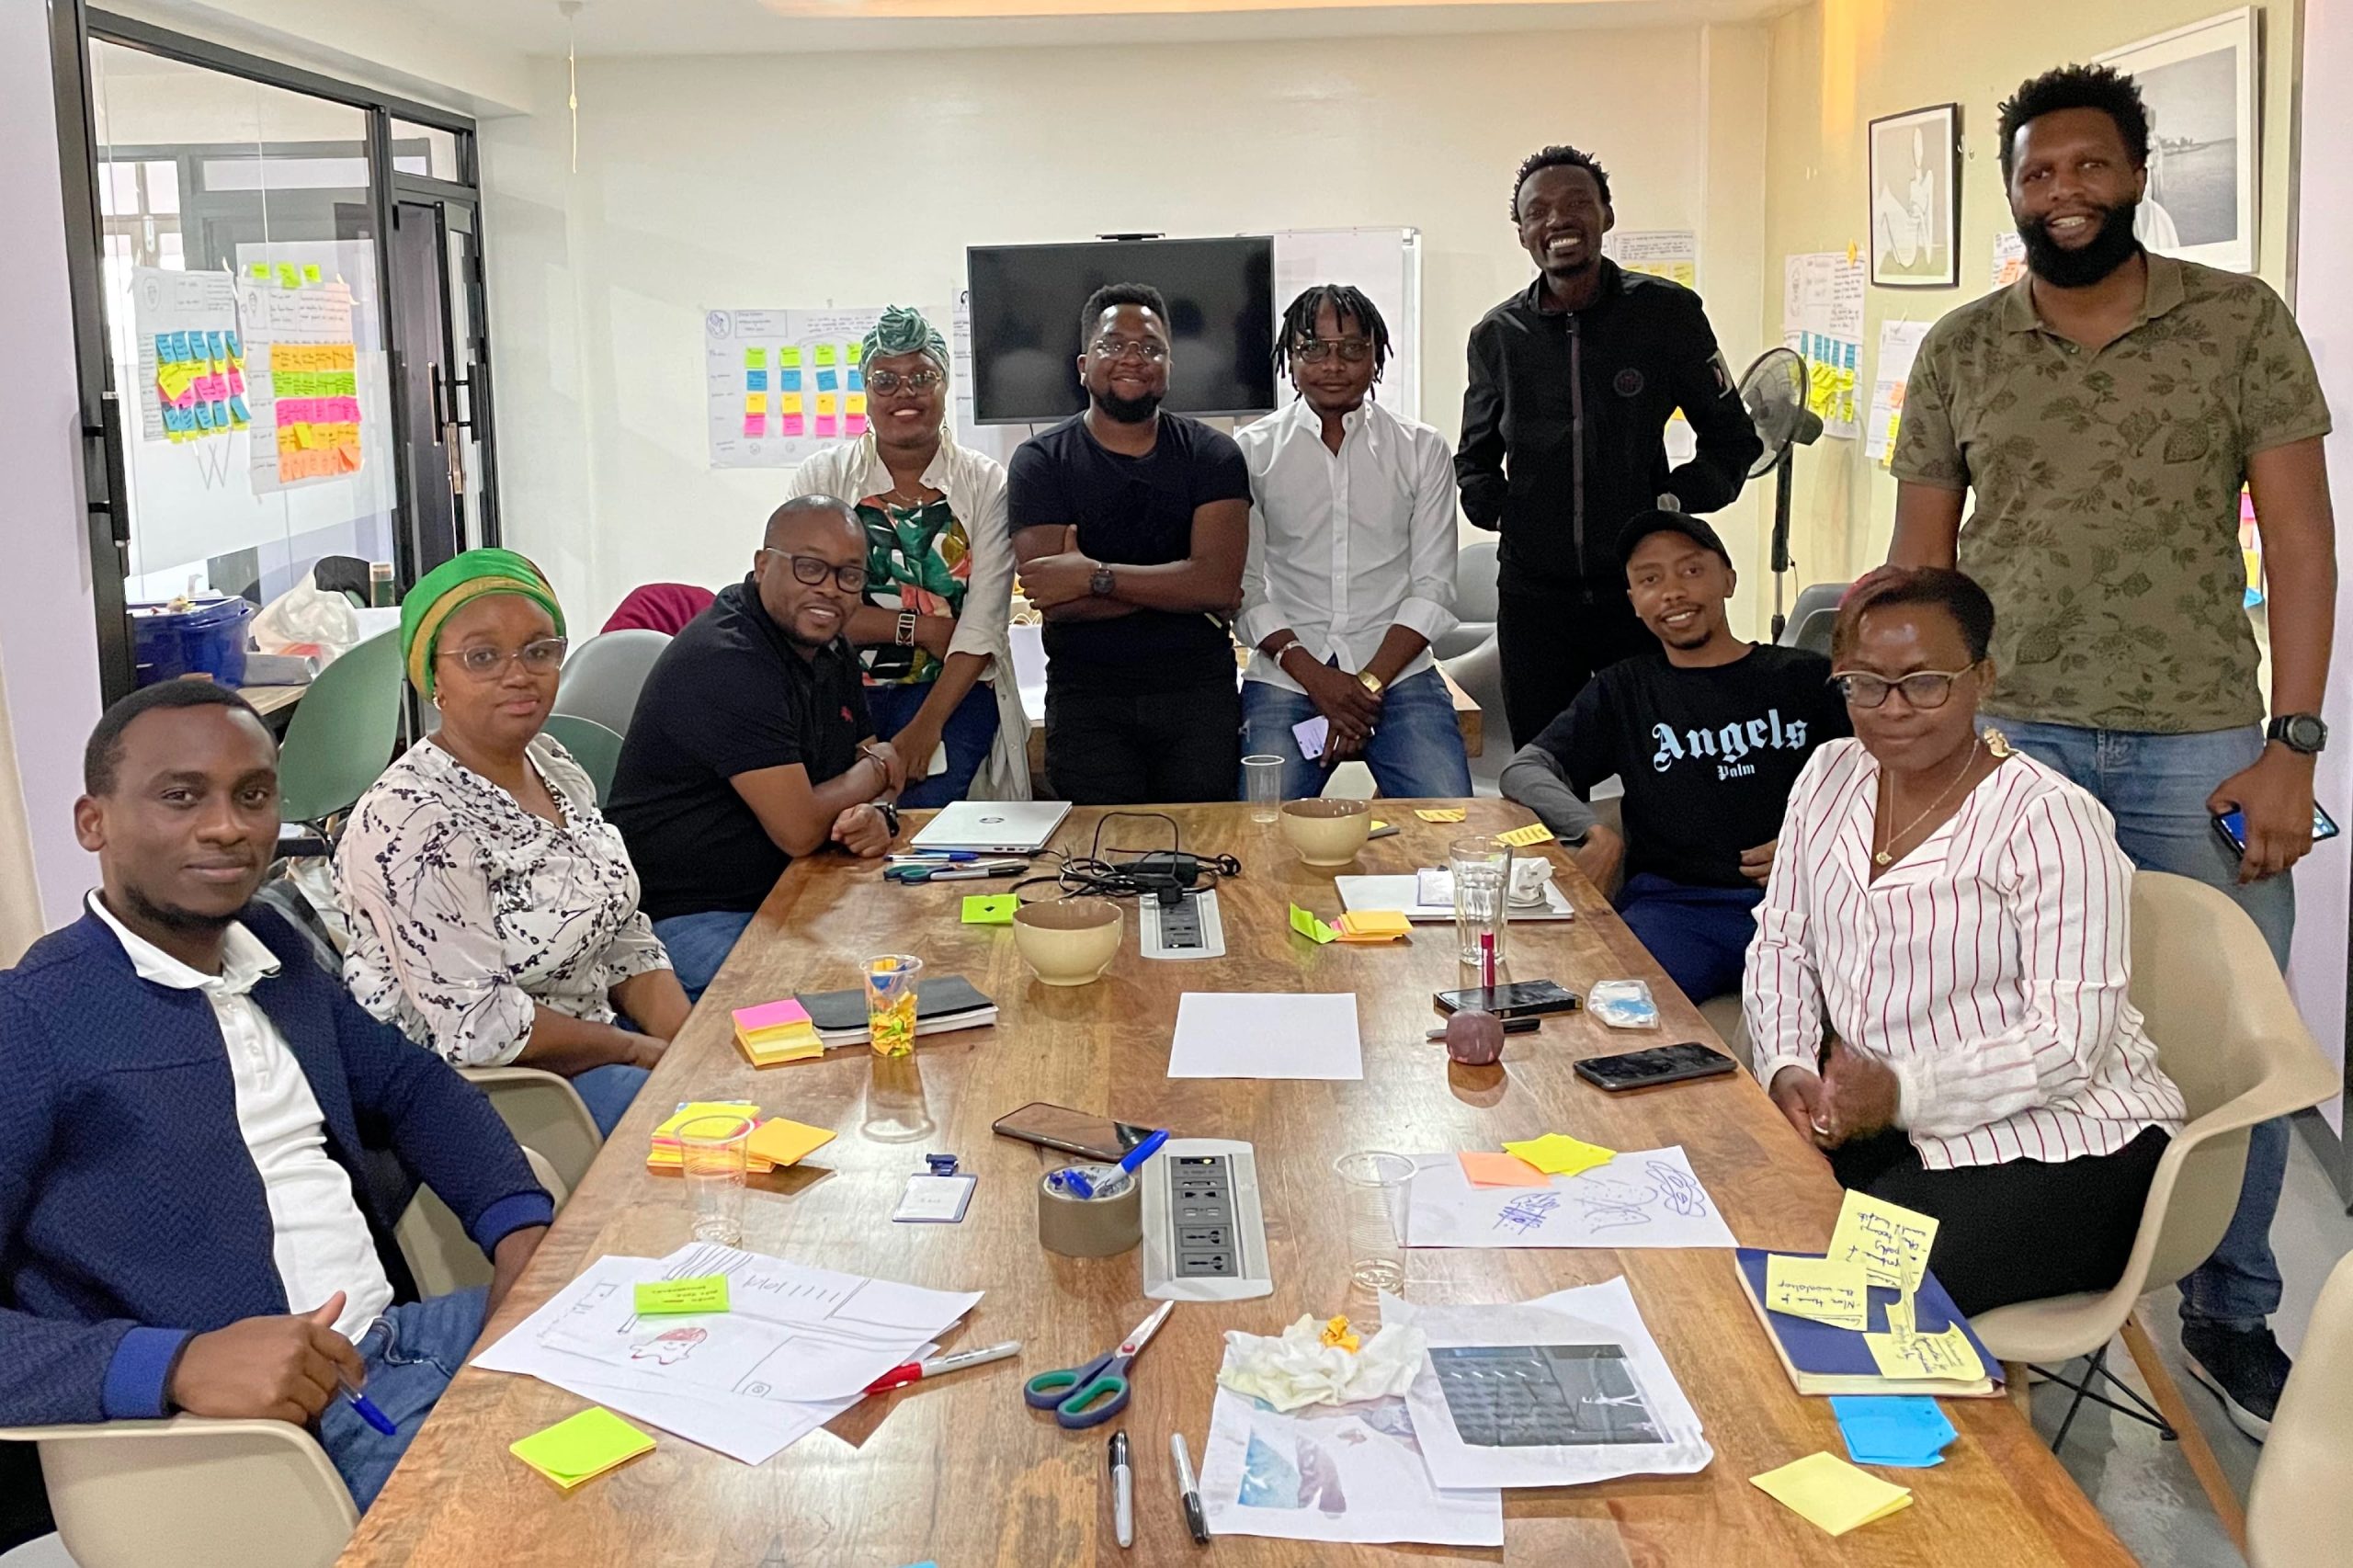 How Might Copia Kenya Product Team leverage Design Thinking to refine their Product Innovation Process?